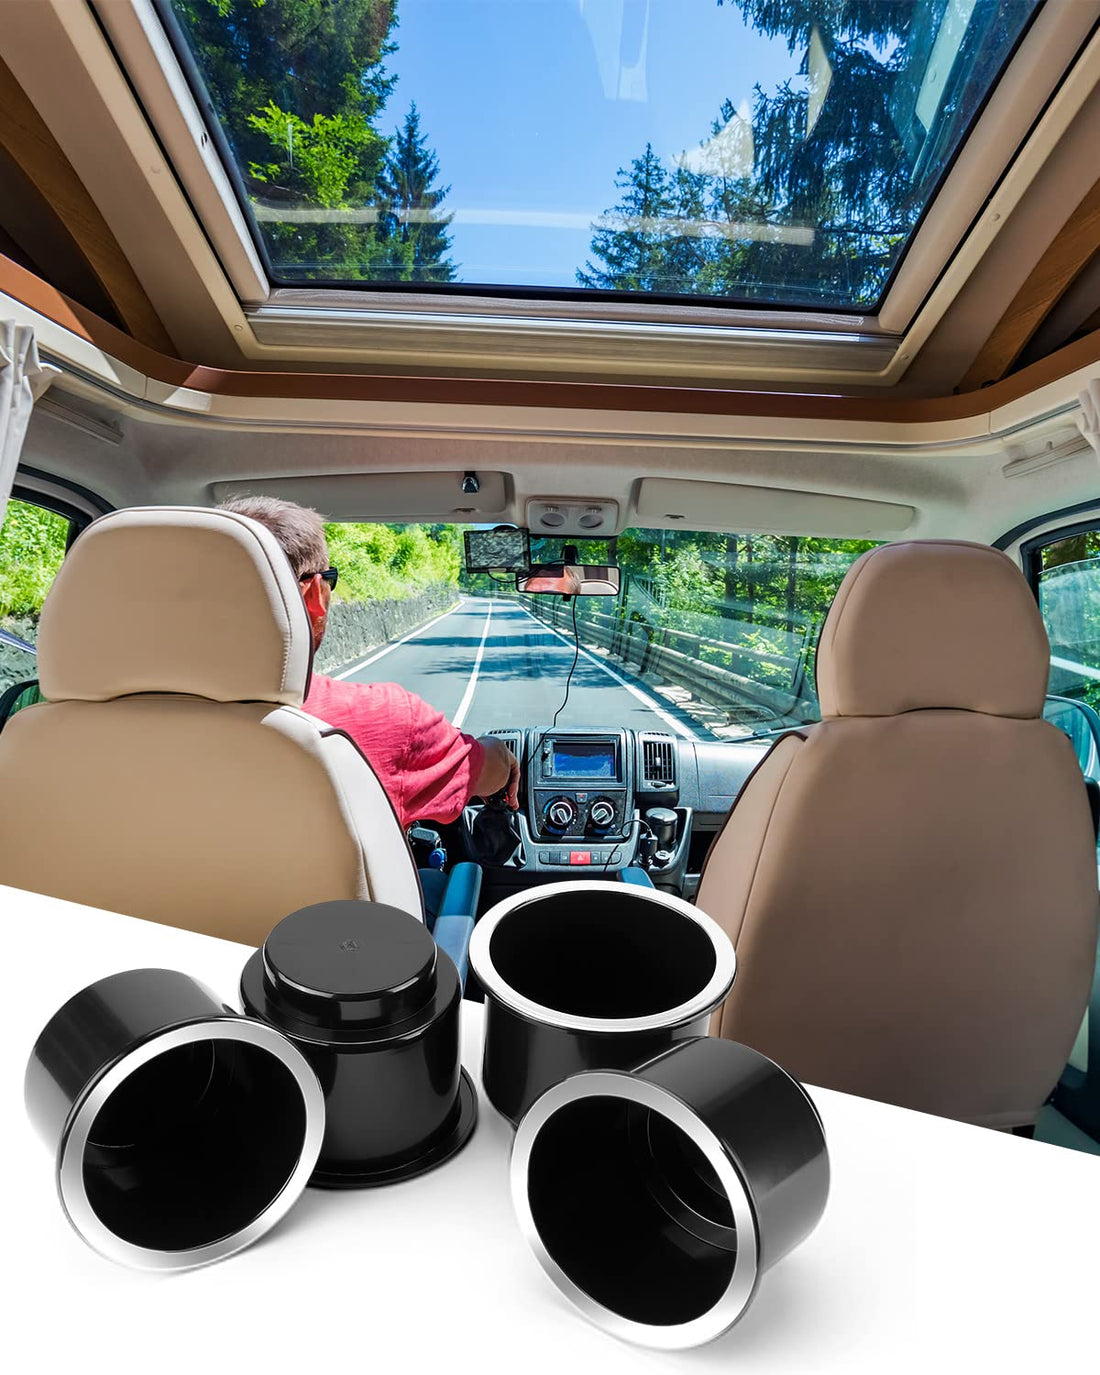 Cup Holder Insert Universal for RV Boat Car Couch Golf Cart, Pontoon Table Sofa